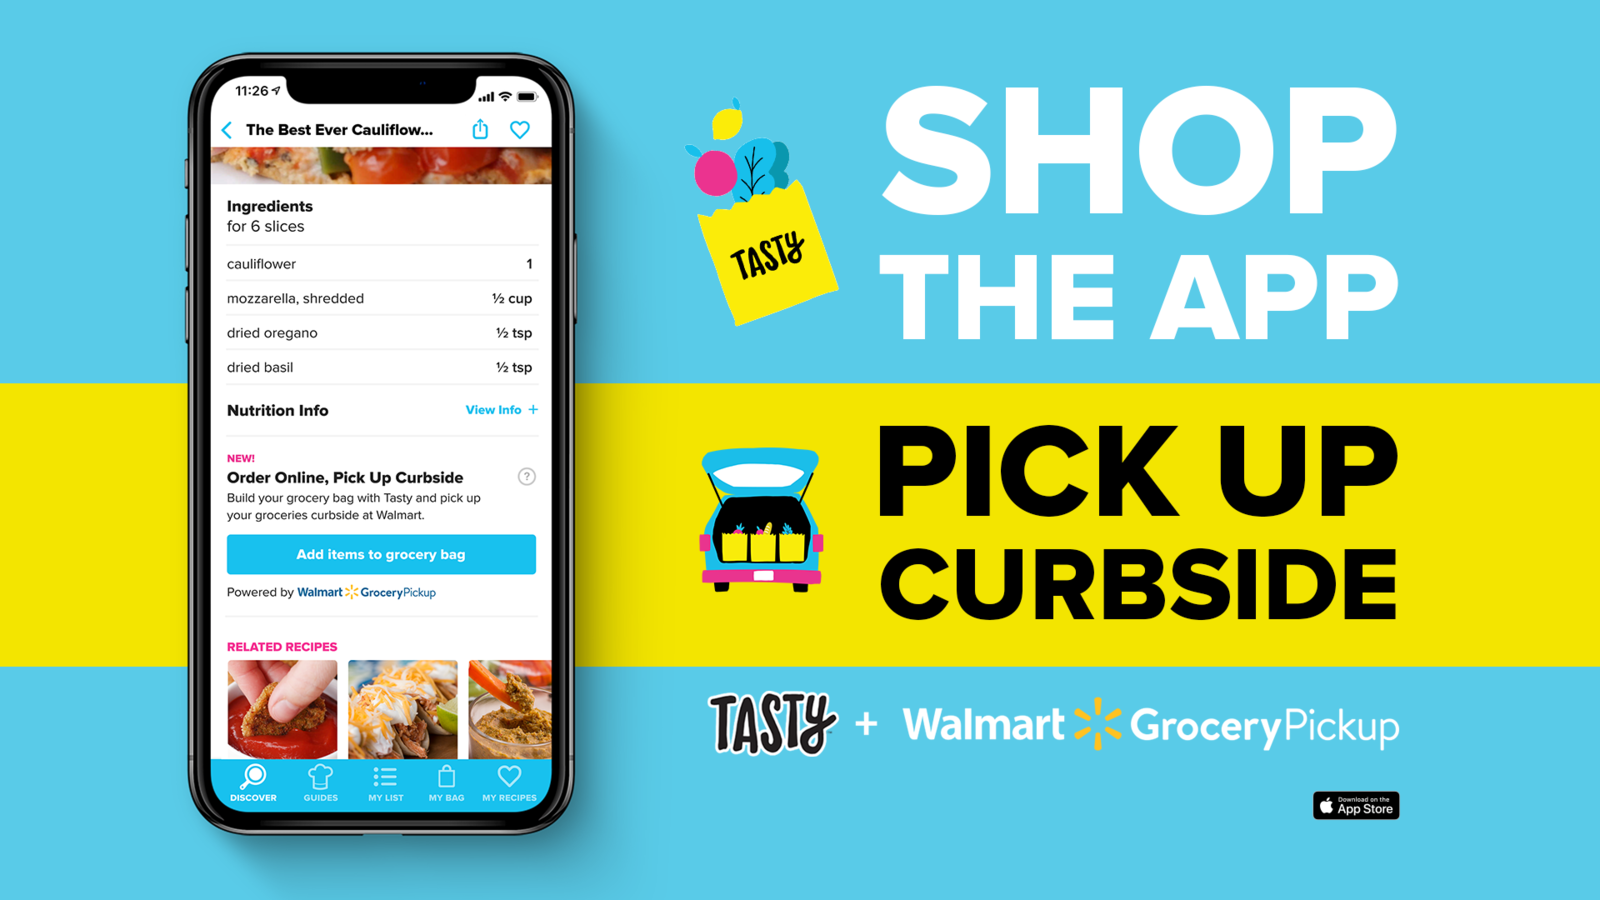 Promotional image for the &#x27;Tasty&#x27; app showcasing a recipe on a phone screen, with text &#x27;Shop The App, Pick Up Curbside&#x27; for Walmart Grocery Pickup